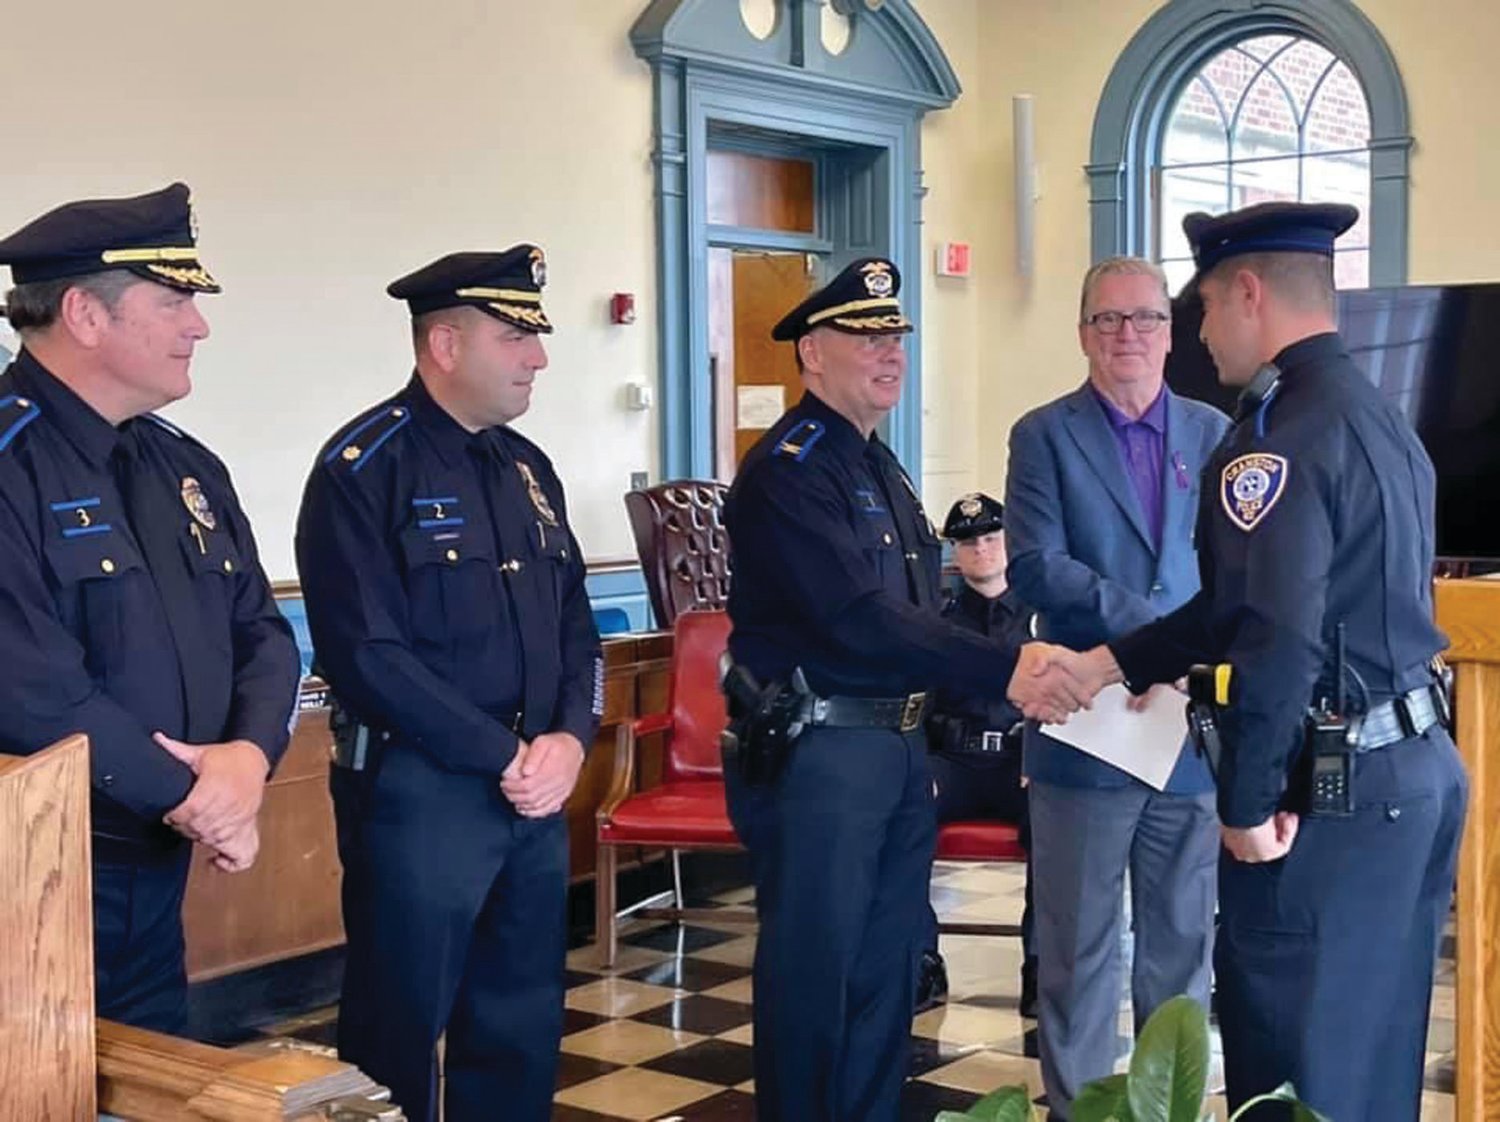 CHIEF’S CONGRATULATIONS:  Chief of Police Col. Michael Winquist congratulates Officer Michael Schiappa during last week’s ceremony. Looking on, from left, are Maj. Robert Quirk, Maj. Todd Patalano and Mayor Ken Hopkins.